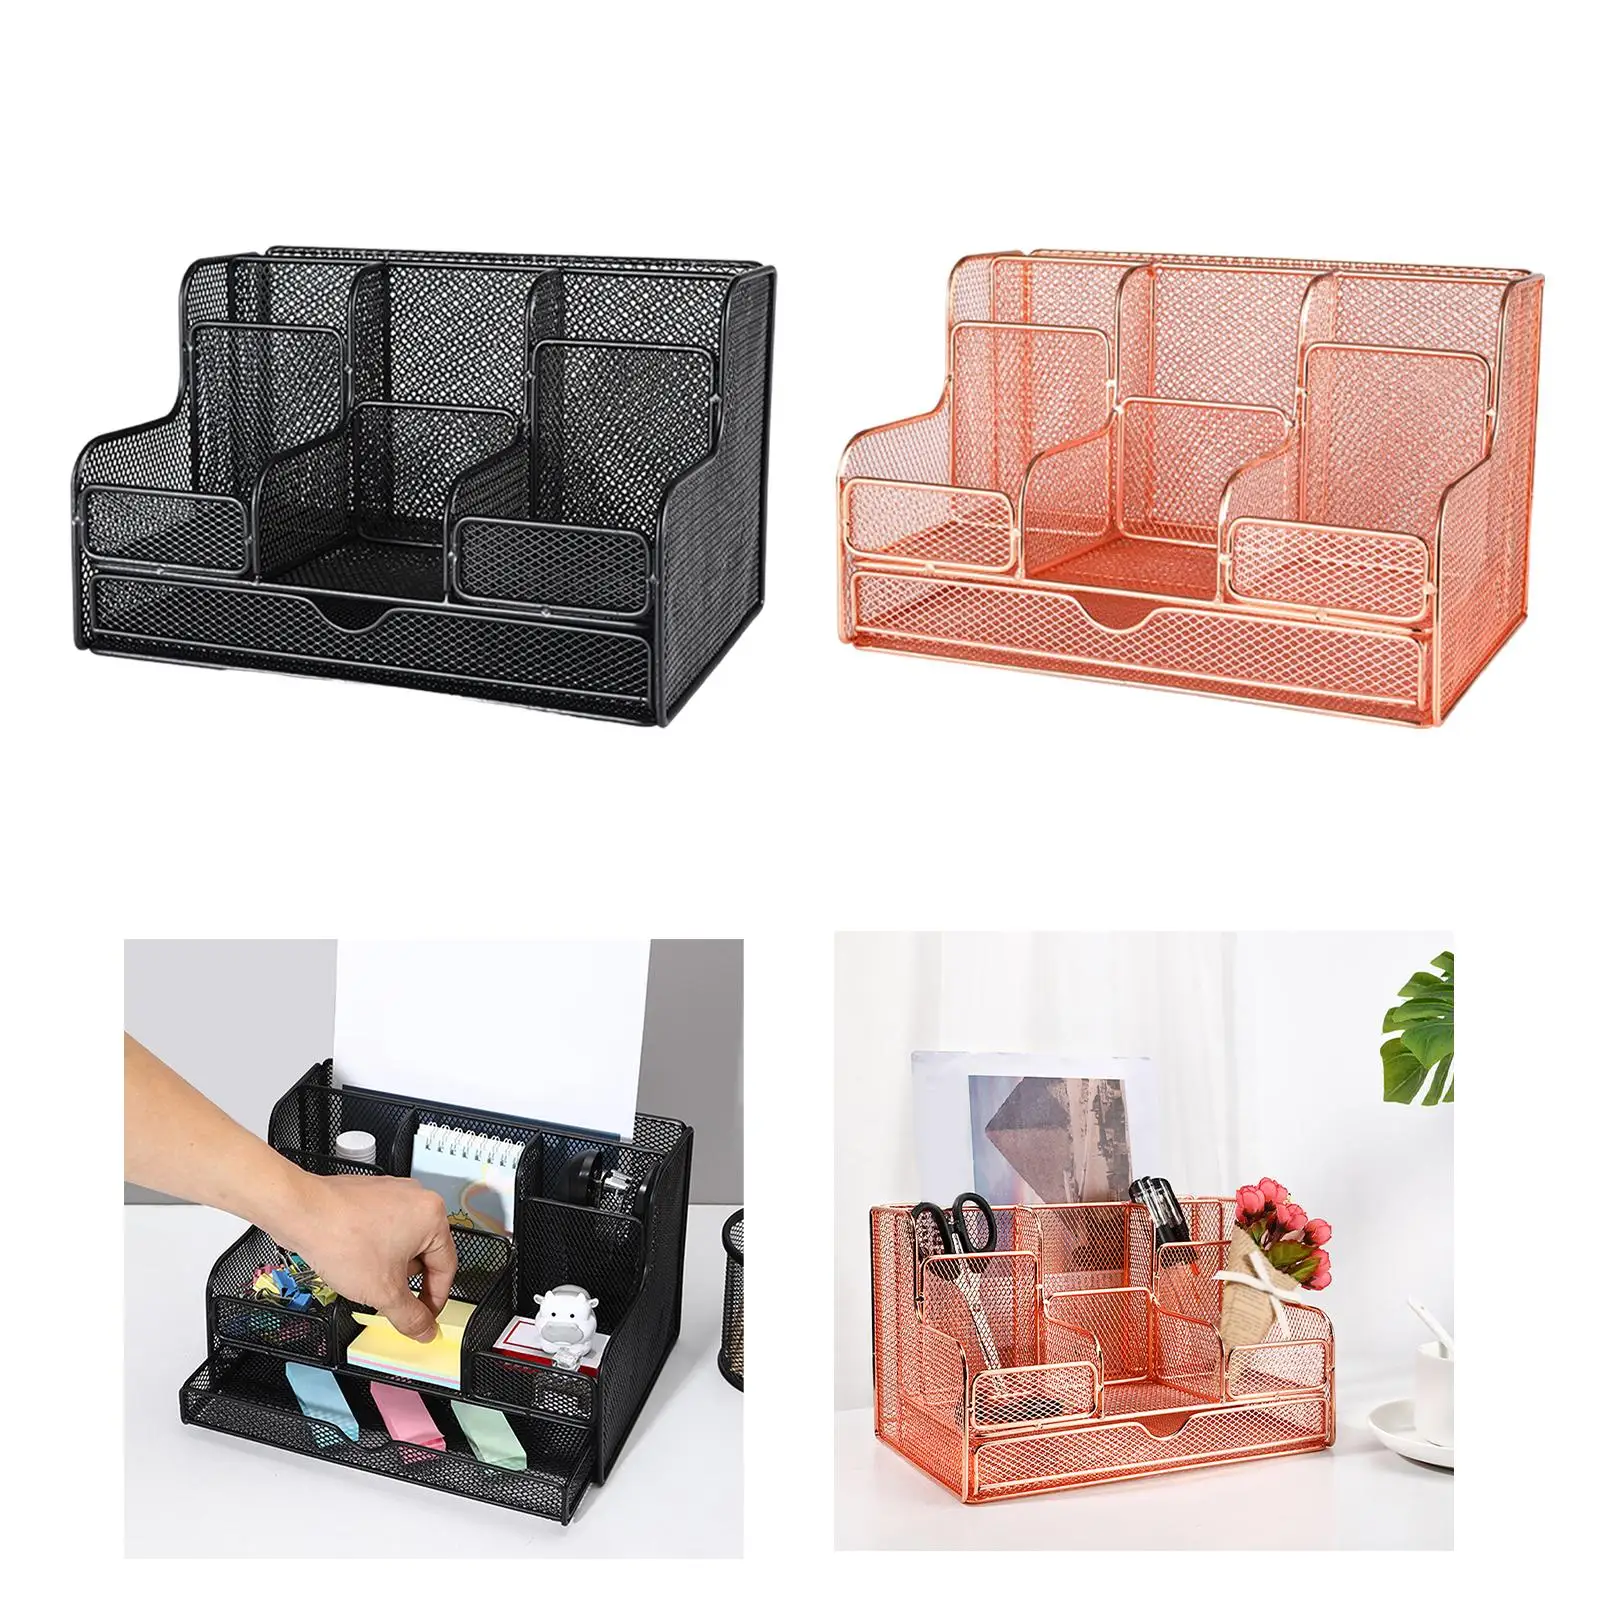 Mesh Desk Organizer, Pencil Holder Sticky Notes Office Supply Storage Caddy Mesh Office Organization for Home Workshop Office